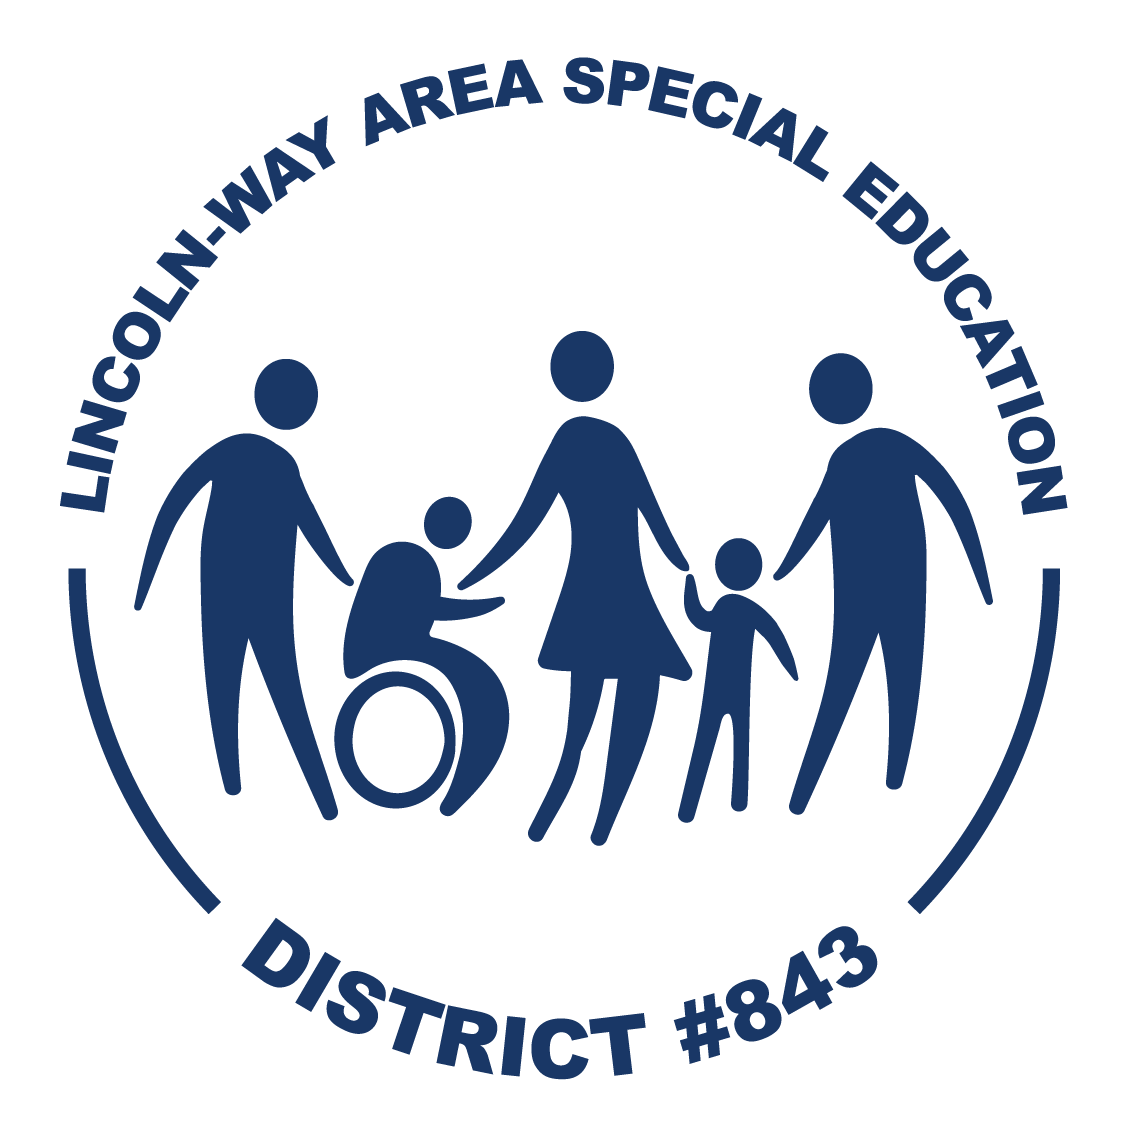 Lincoln-Way Area Special Education District 843 logo